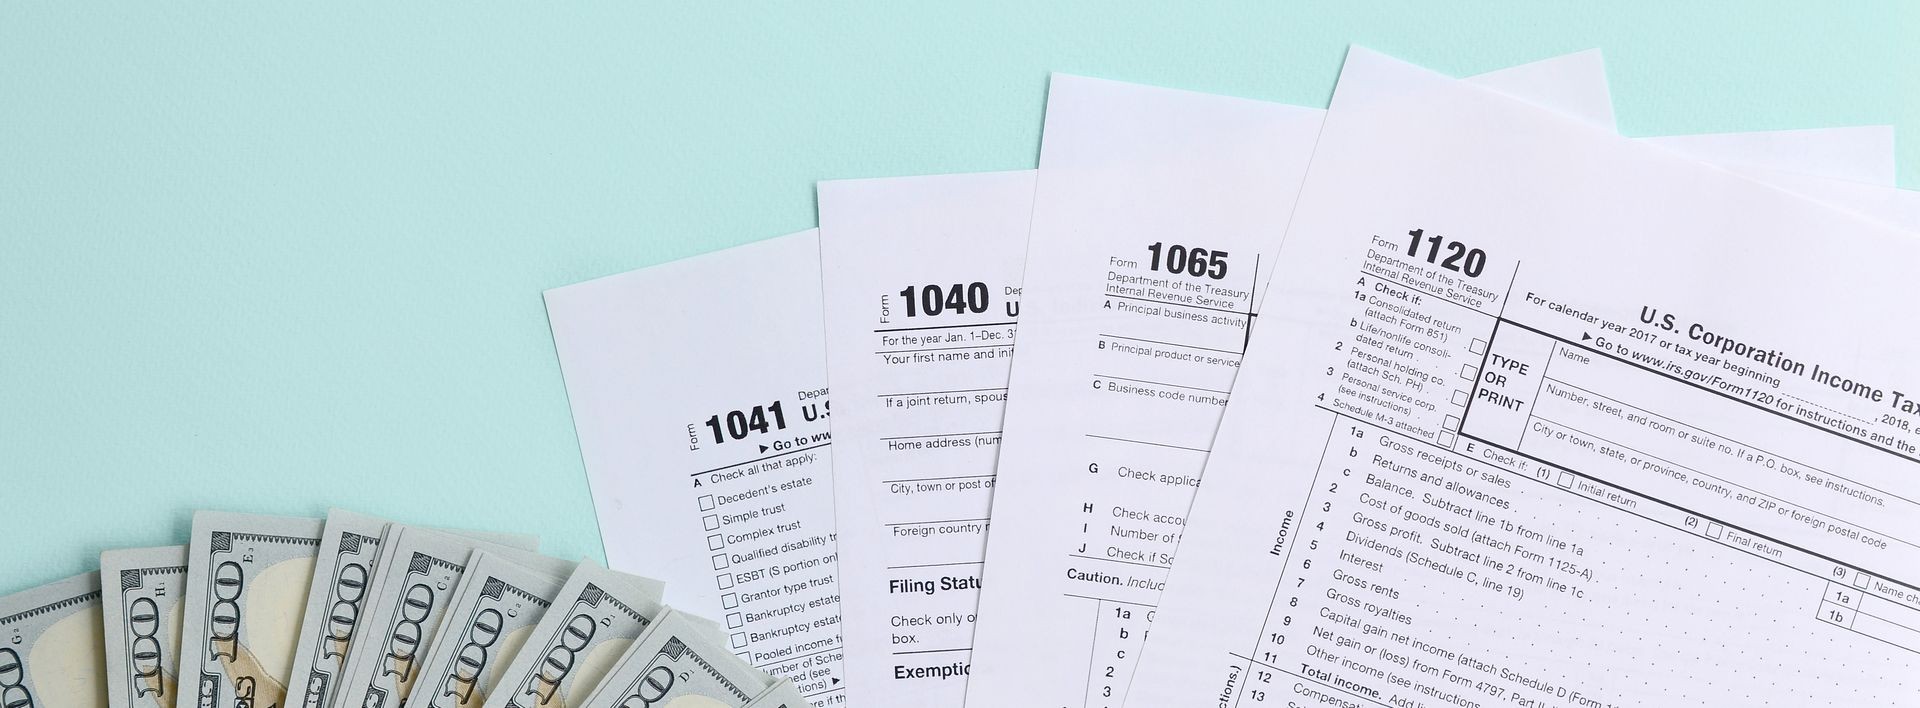 Tax forms lies near hundred dollar bills and blue pen on a light blue background. Income tax return